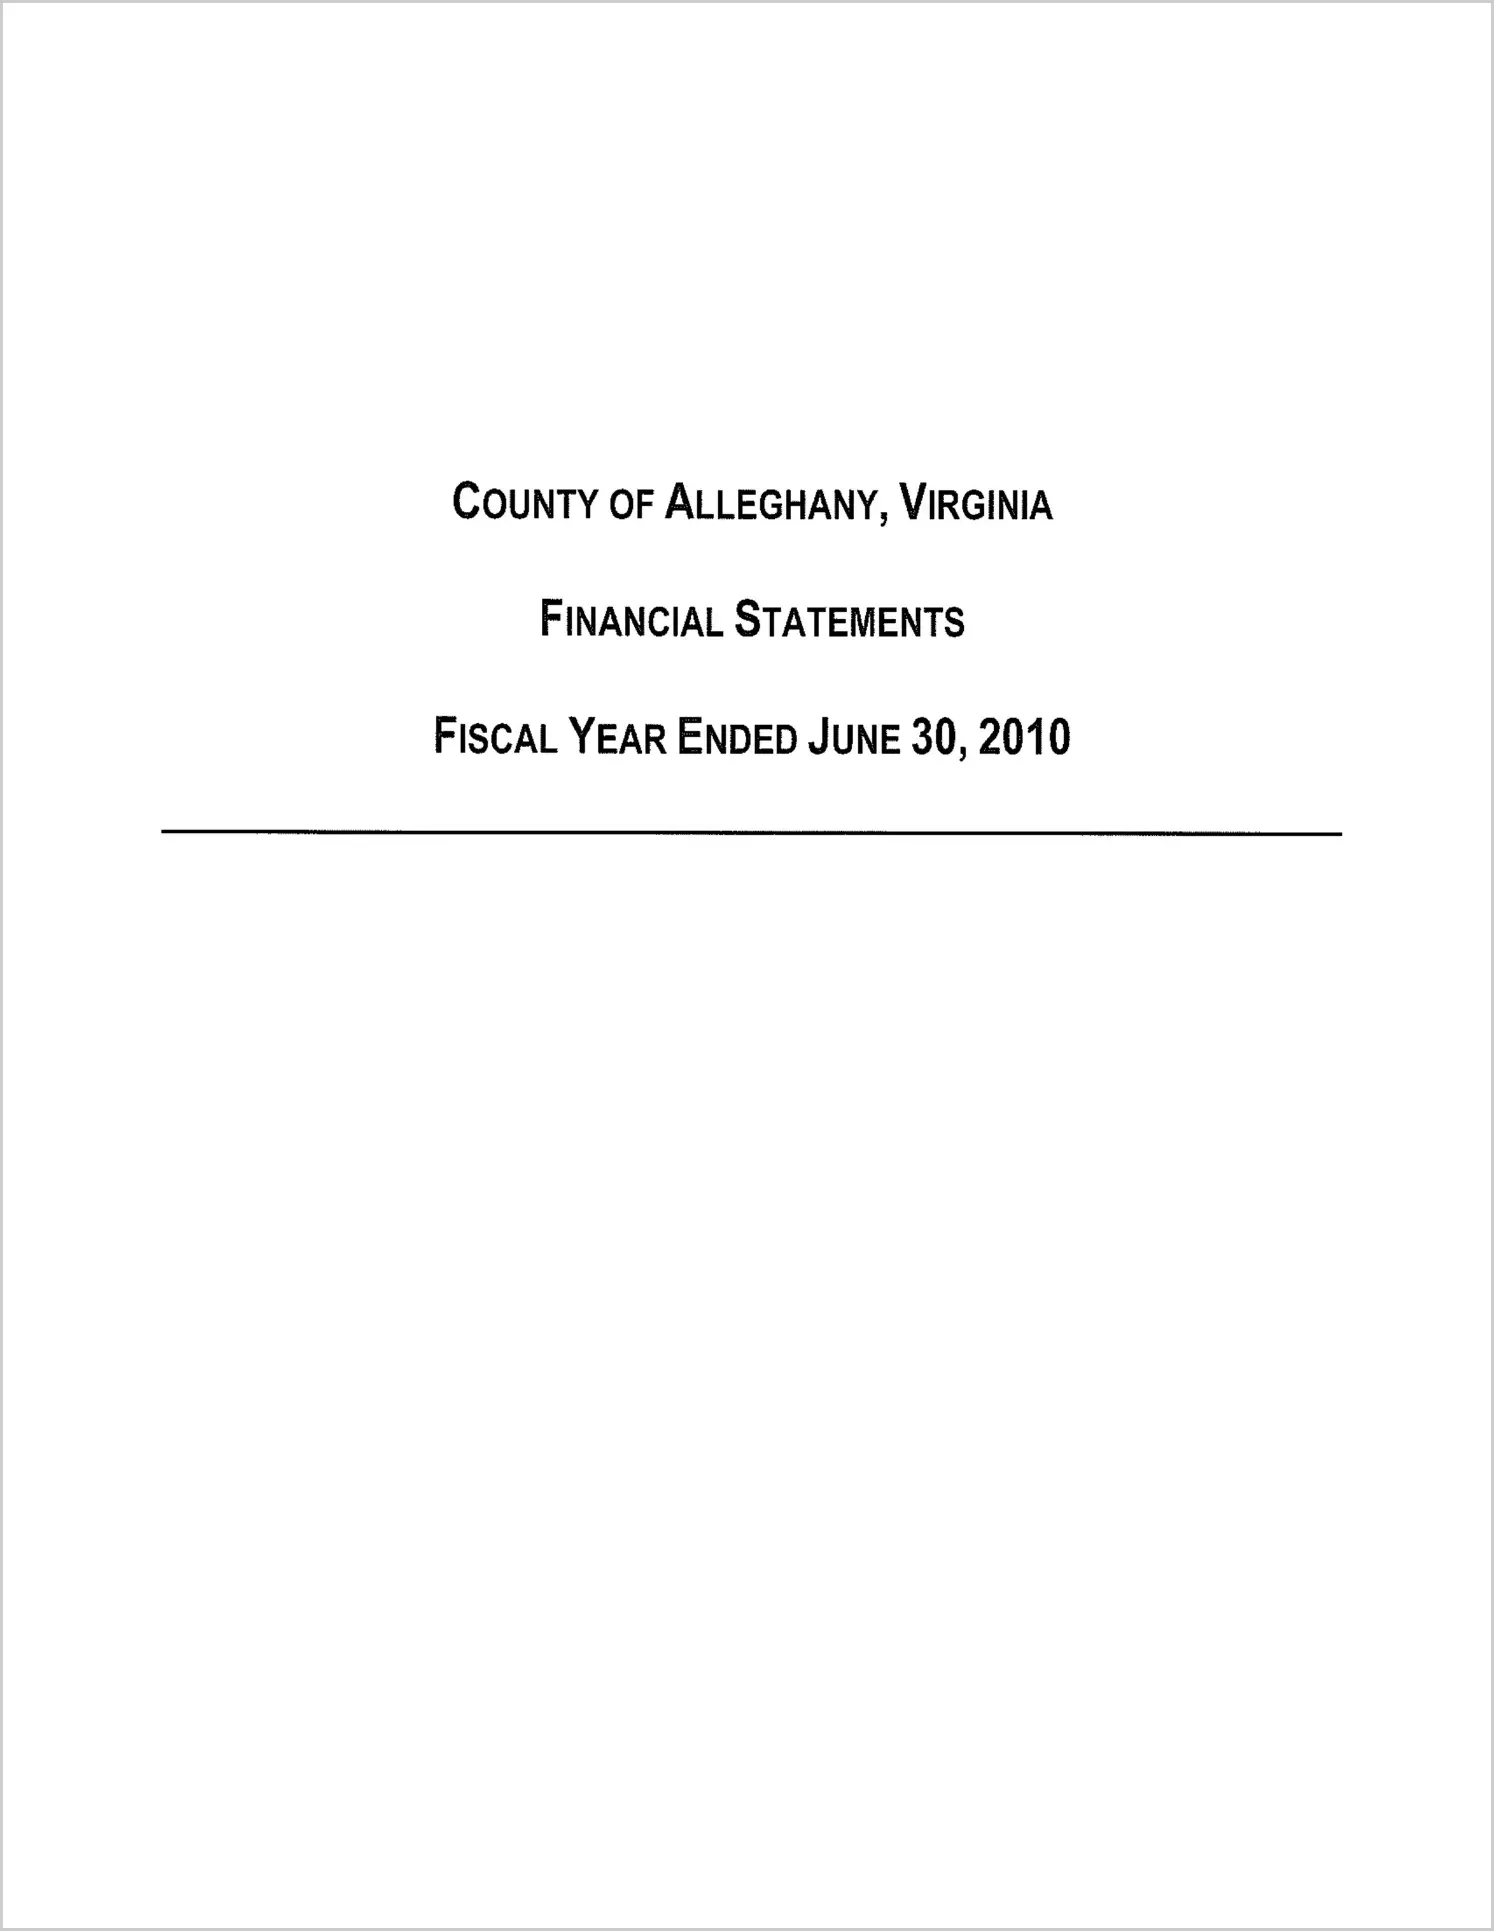 2010 Annual Financial Report for County of Alleghany